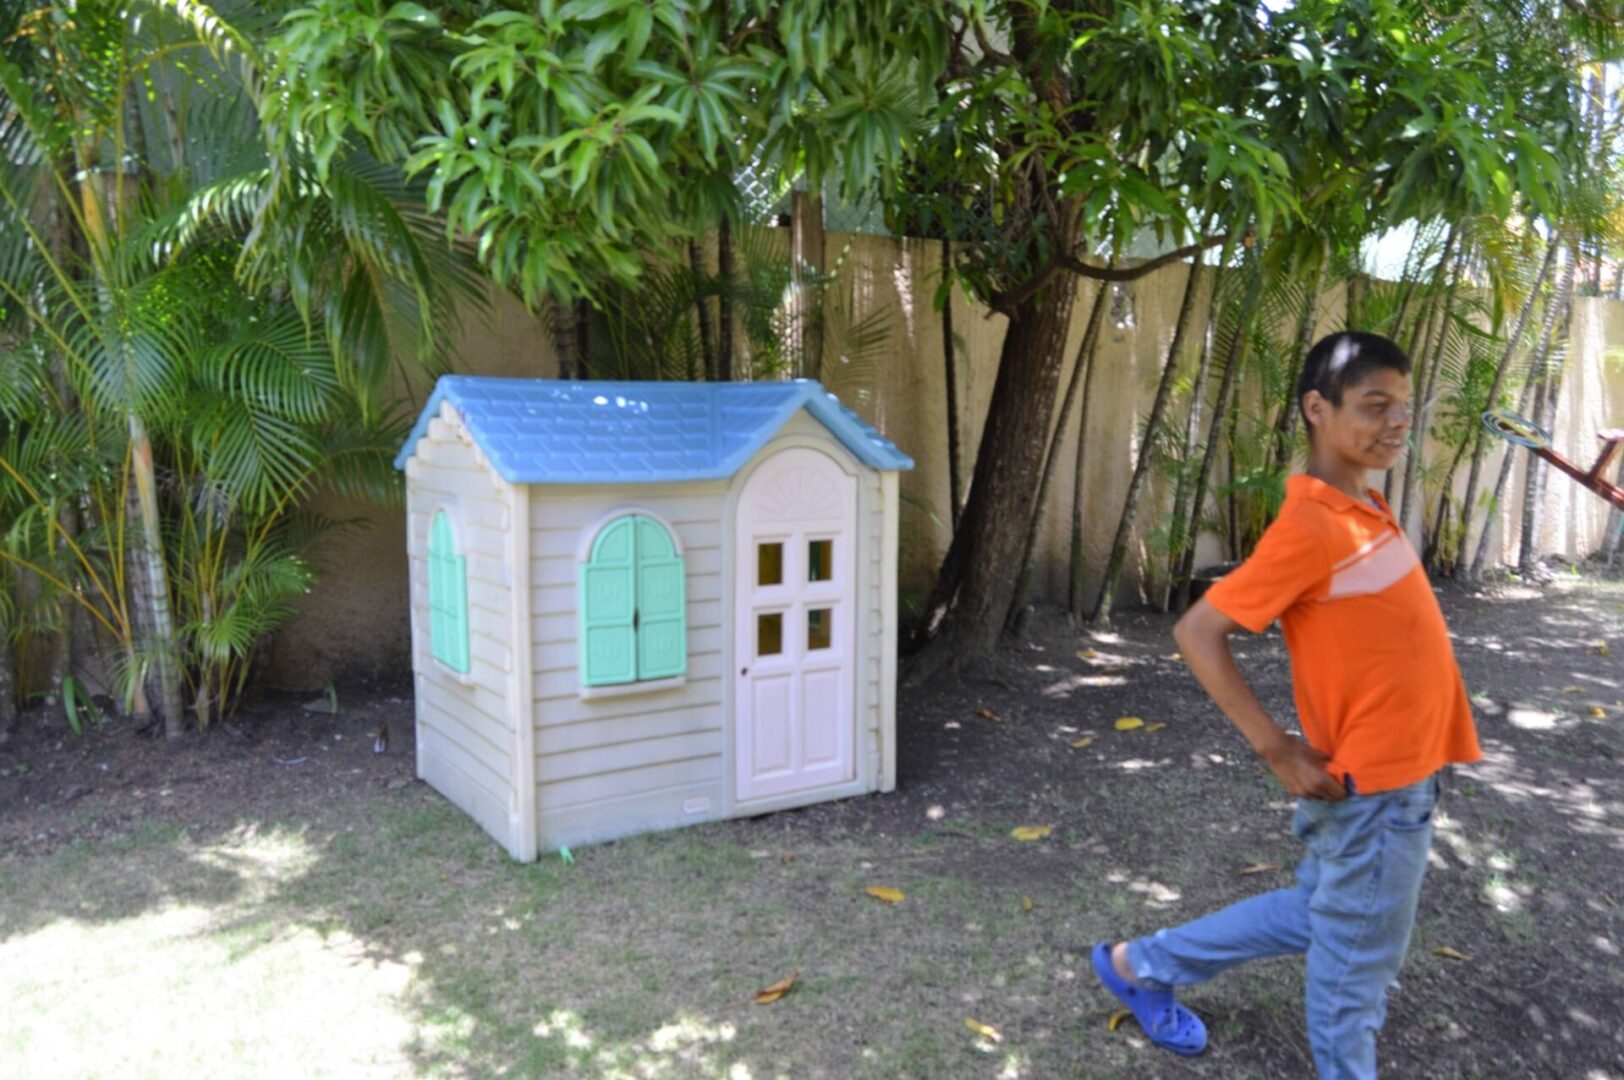 A boy in an orange shirt smiling and walking away from the toy house